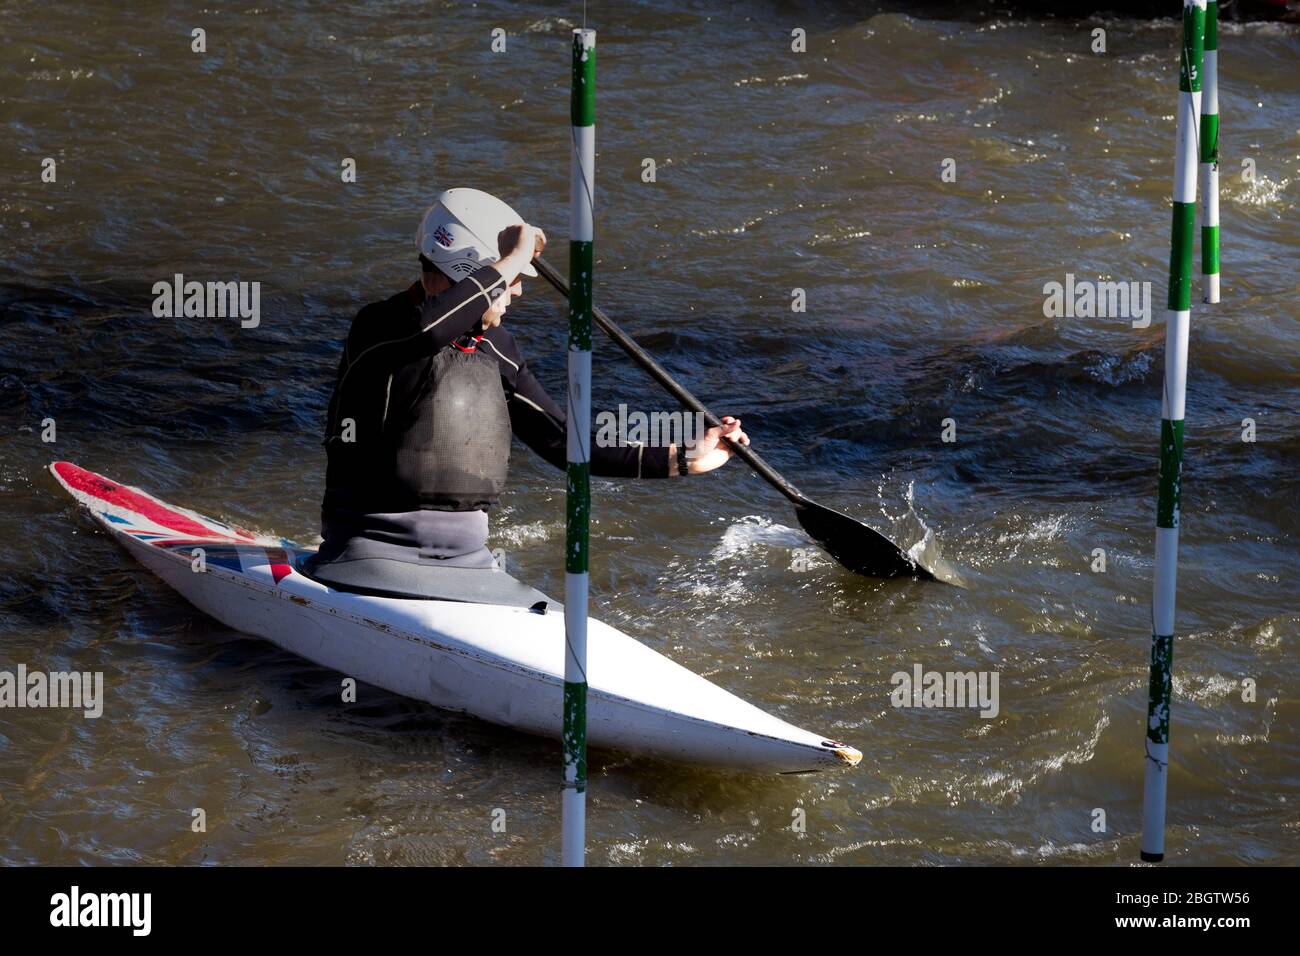 A man practising kayak as exercise for competitions Stock Photo